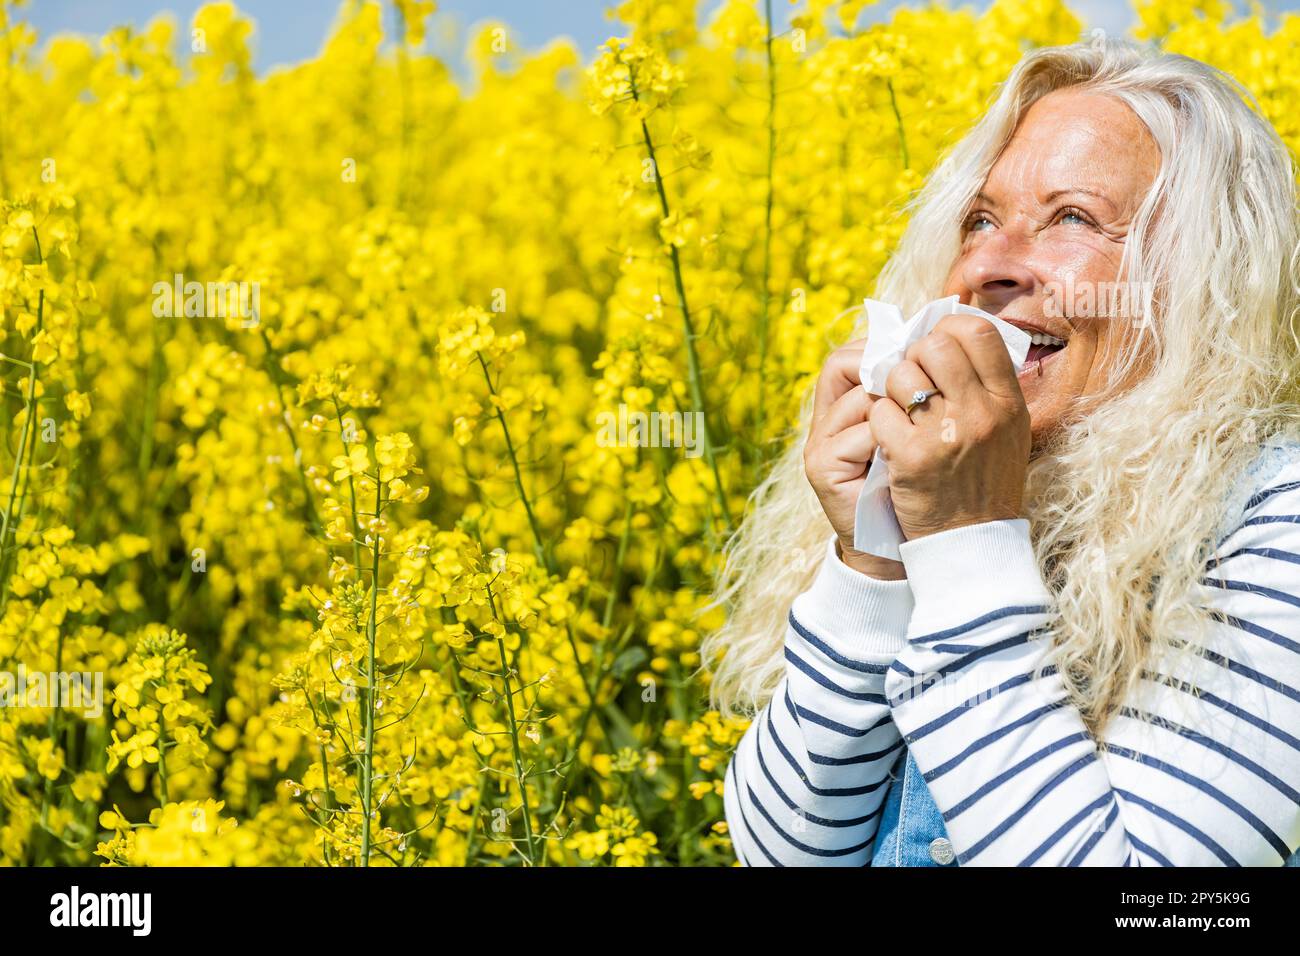 Woman suffers from allergy in a rape field and has to sneeze. Stock Photo